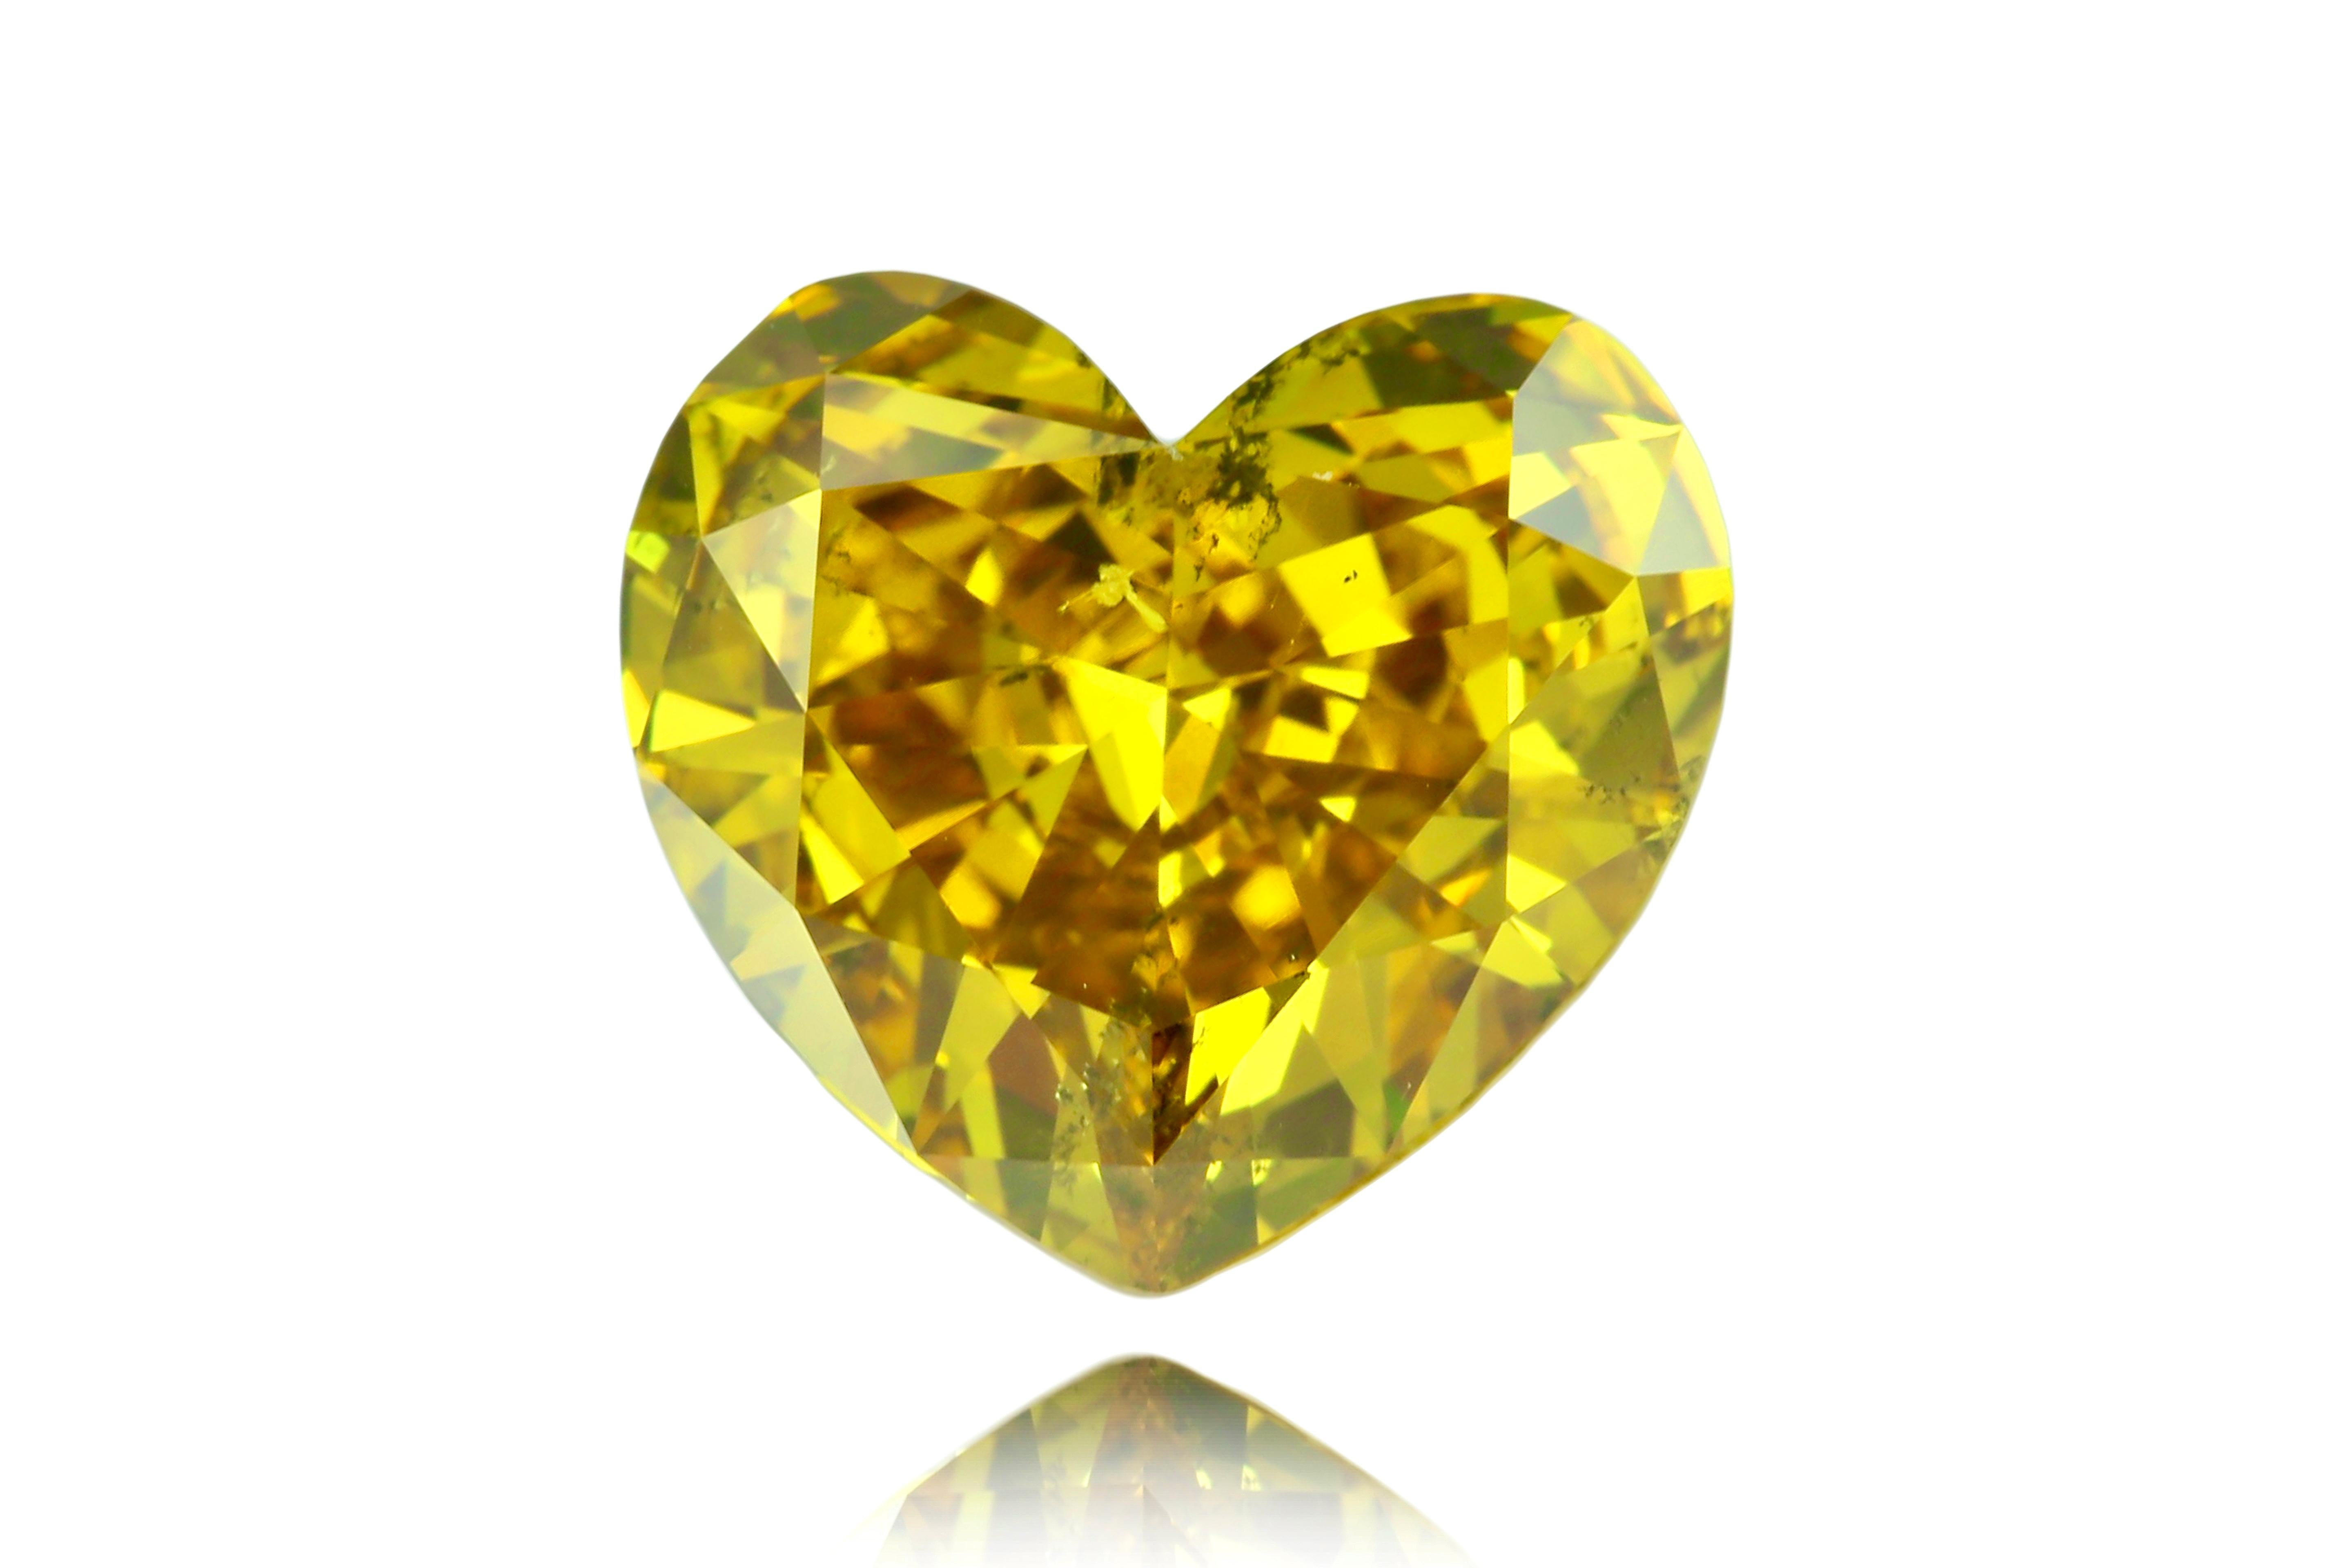 Introducing the Exquisite 7.30 Carat Heart Shape Diamond in Fancy Deep Brownish Greenish Yellow:

Elegance meets rarity in this stunning 7.30-carat heart-shaped diamond, a true masterpiece of nature. Boasting a mesmerizing Fancy Deep Brownish